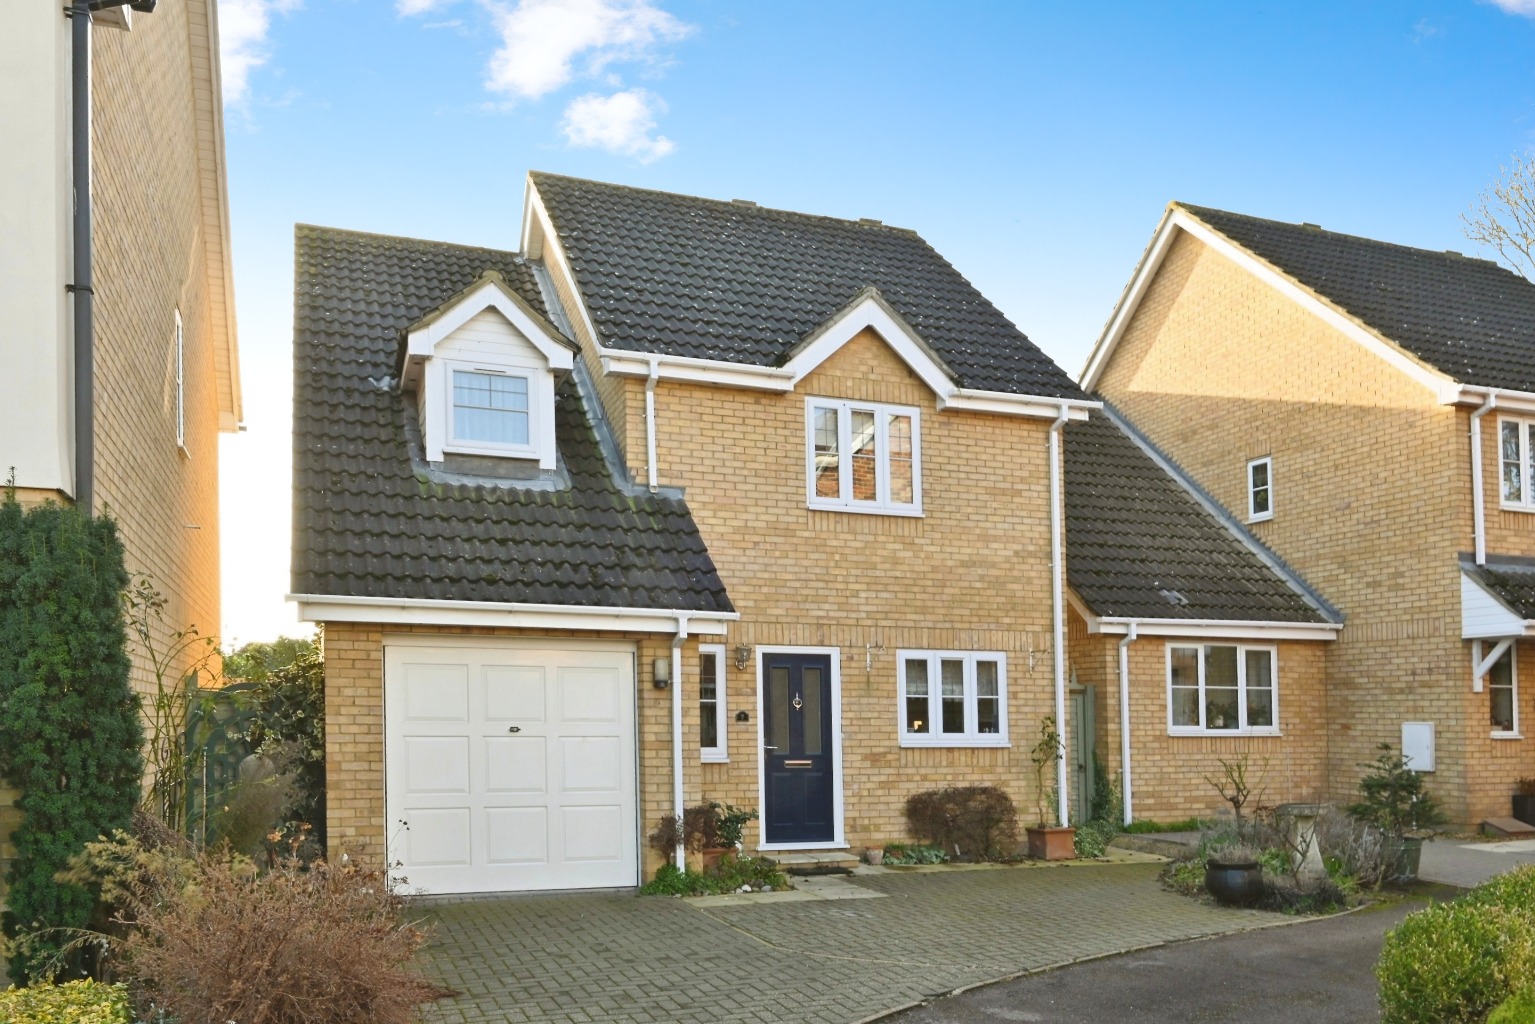 3 bed detached house for sale in Roberts Close, St Neots - Property Image 1